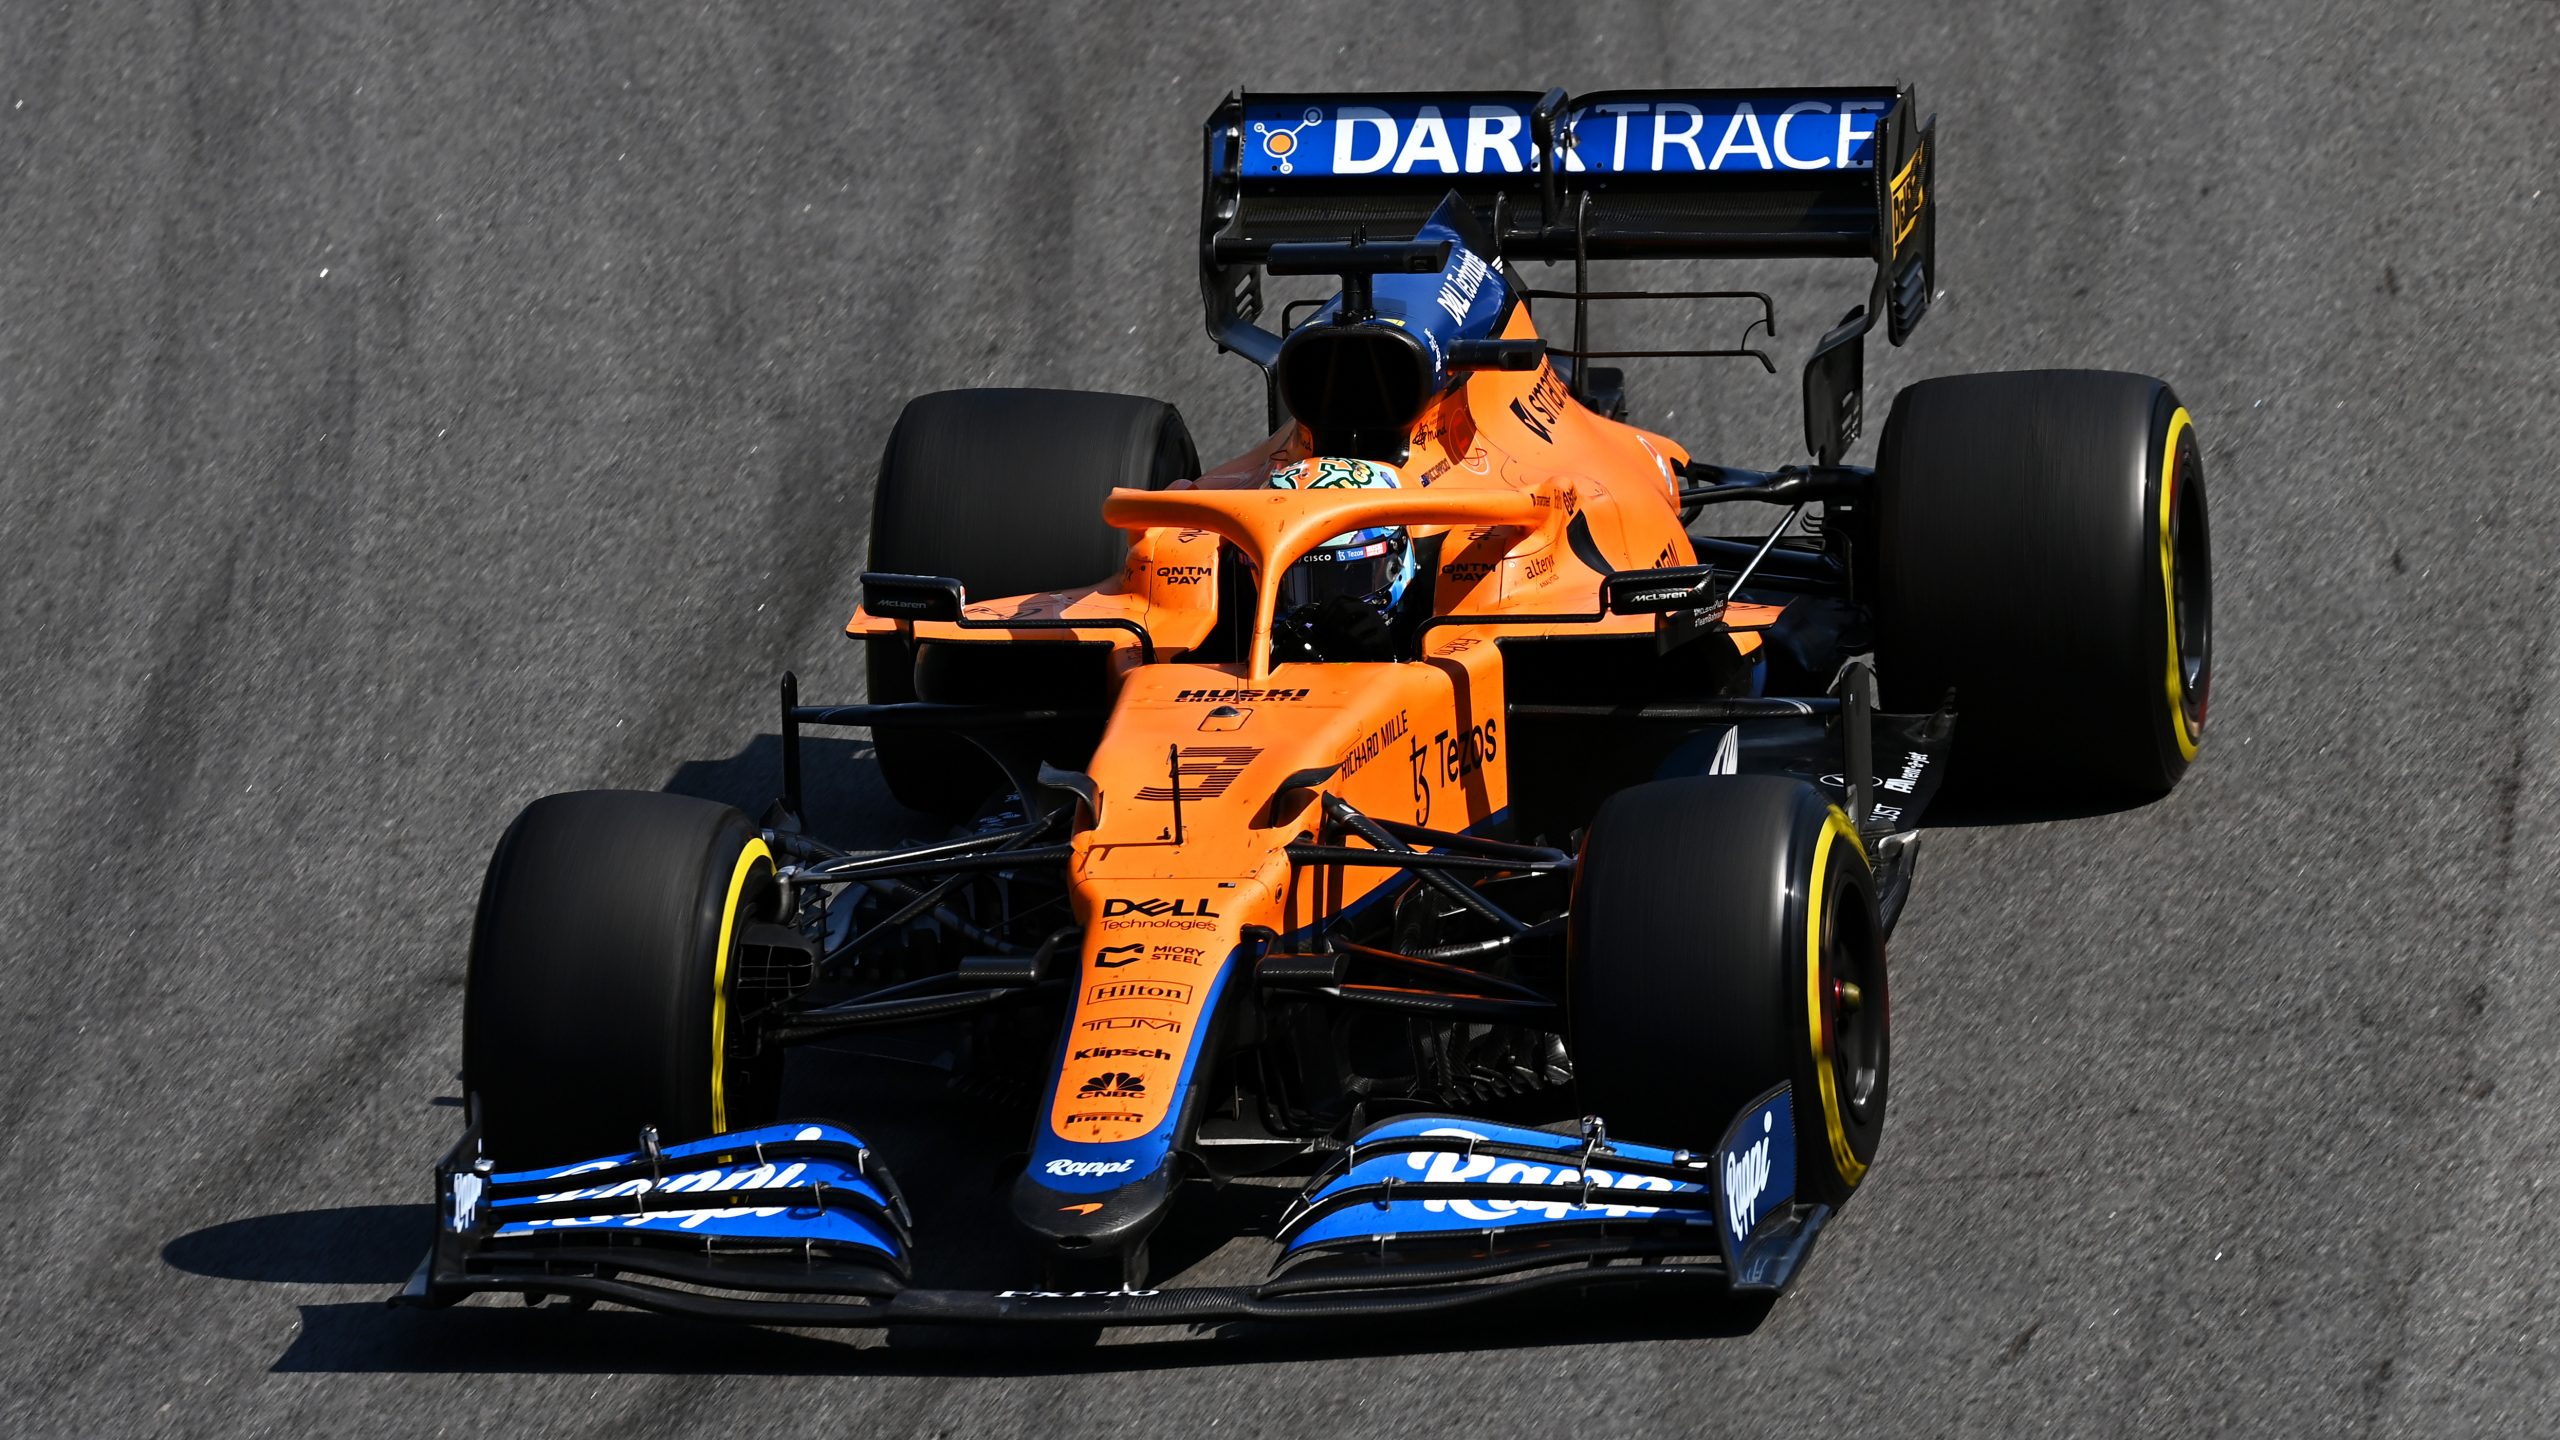 McLaren Discover a Cracked Chassis is the Cause of Daniel Ricciardo’s Retirement From Sao Paulo Grand Prix